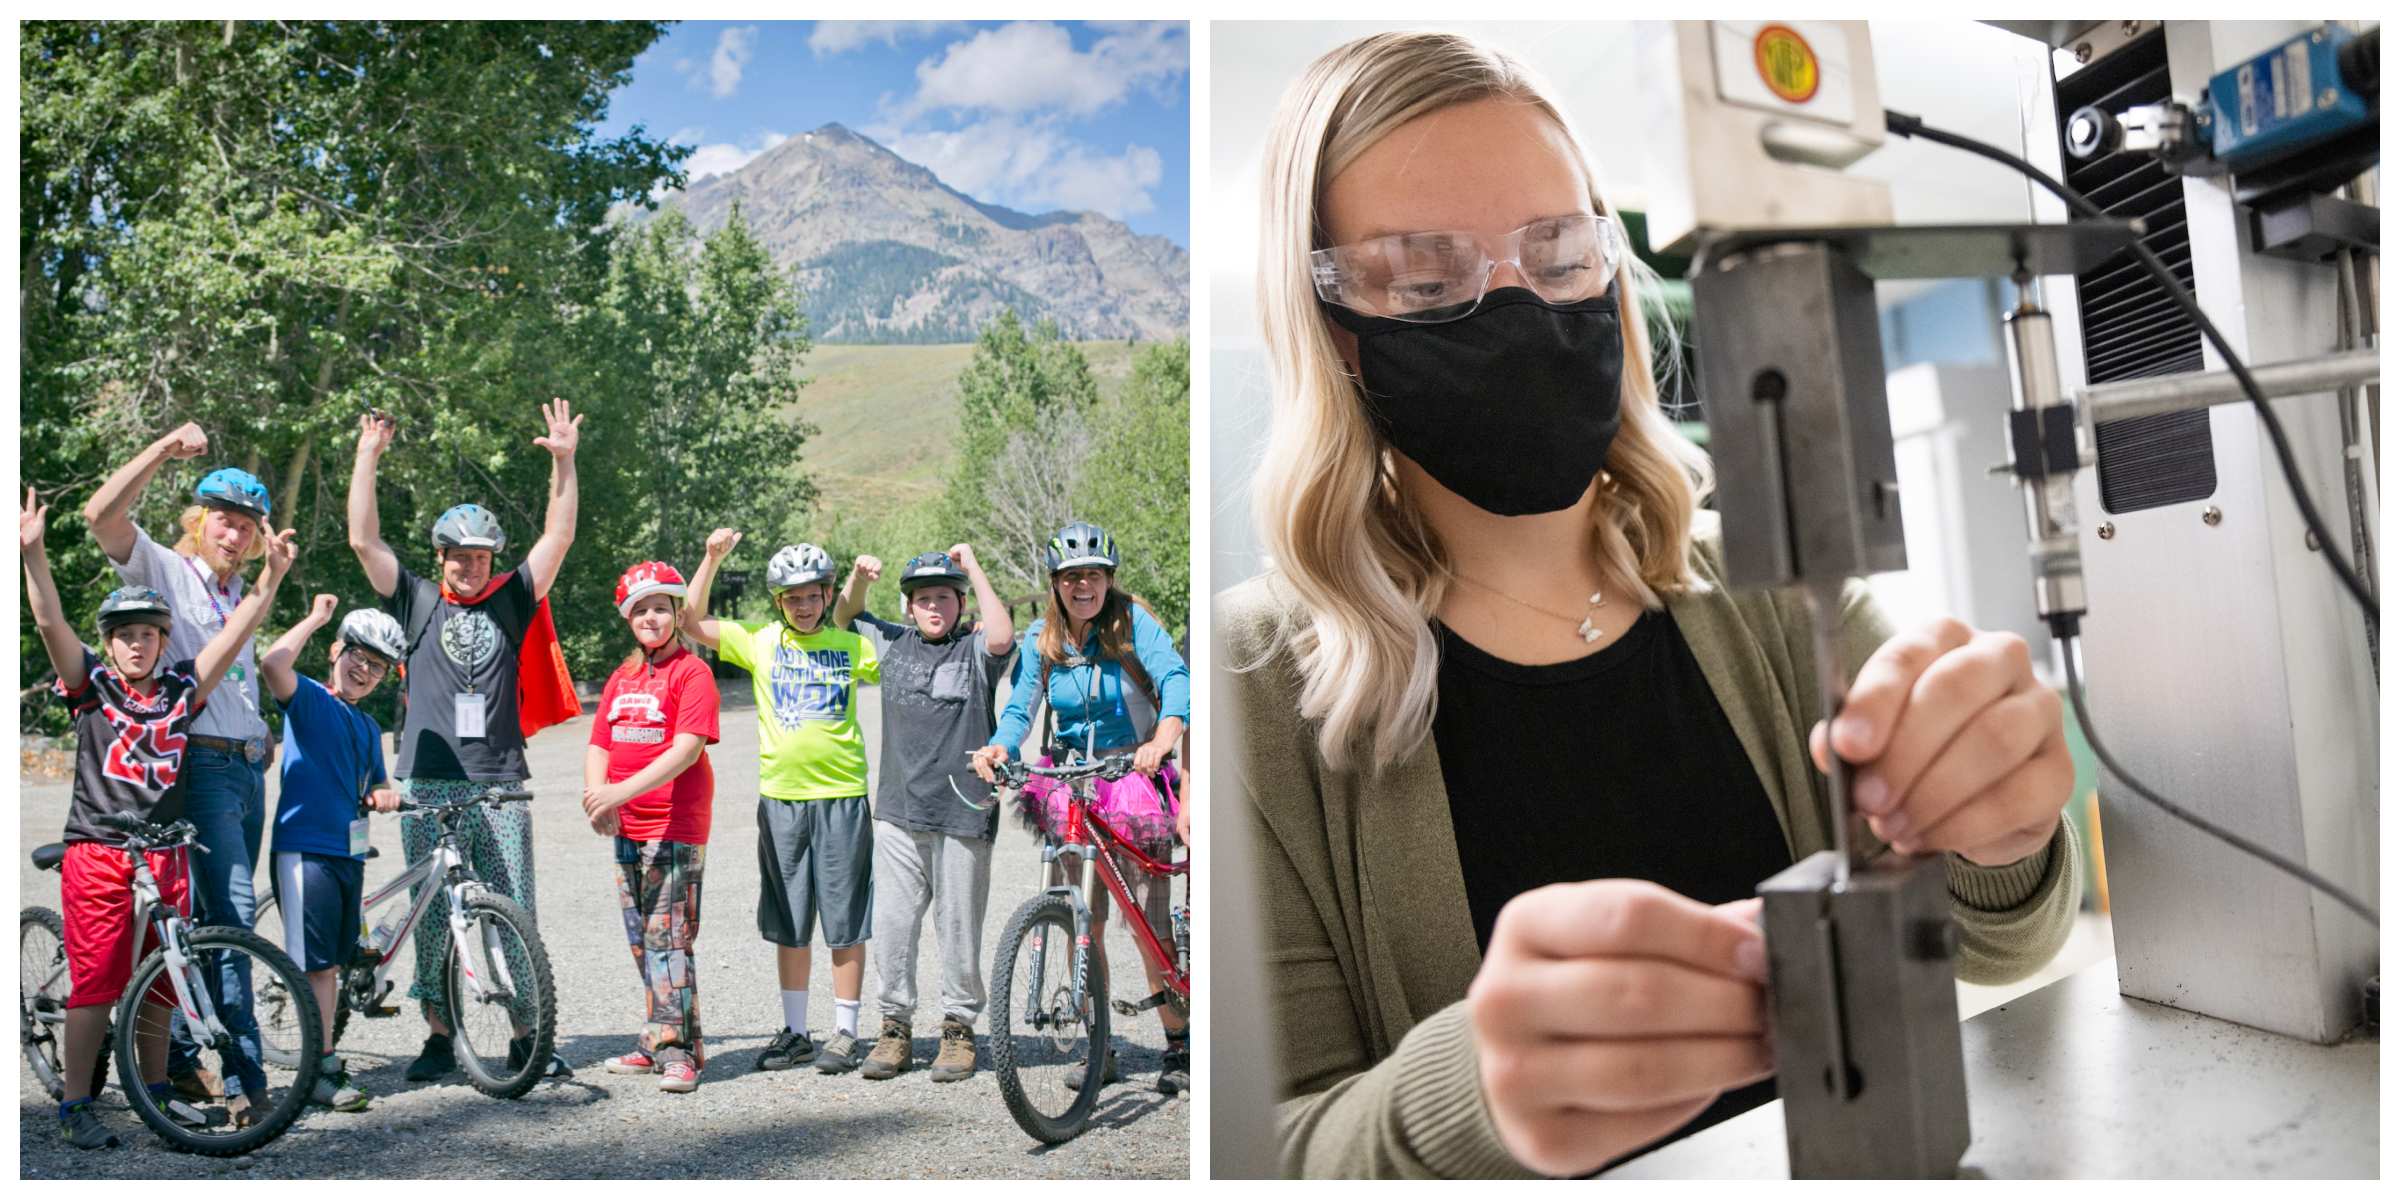 Image 1: a group of children and adults wearing helmets stand next to their bikes outside. Image 2: a woman with blond hair uses 3D imaging equipment. 